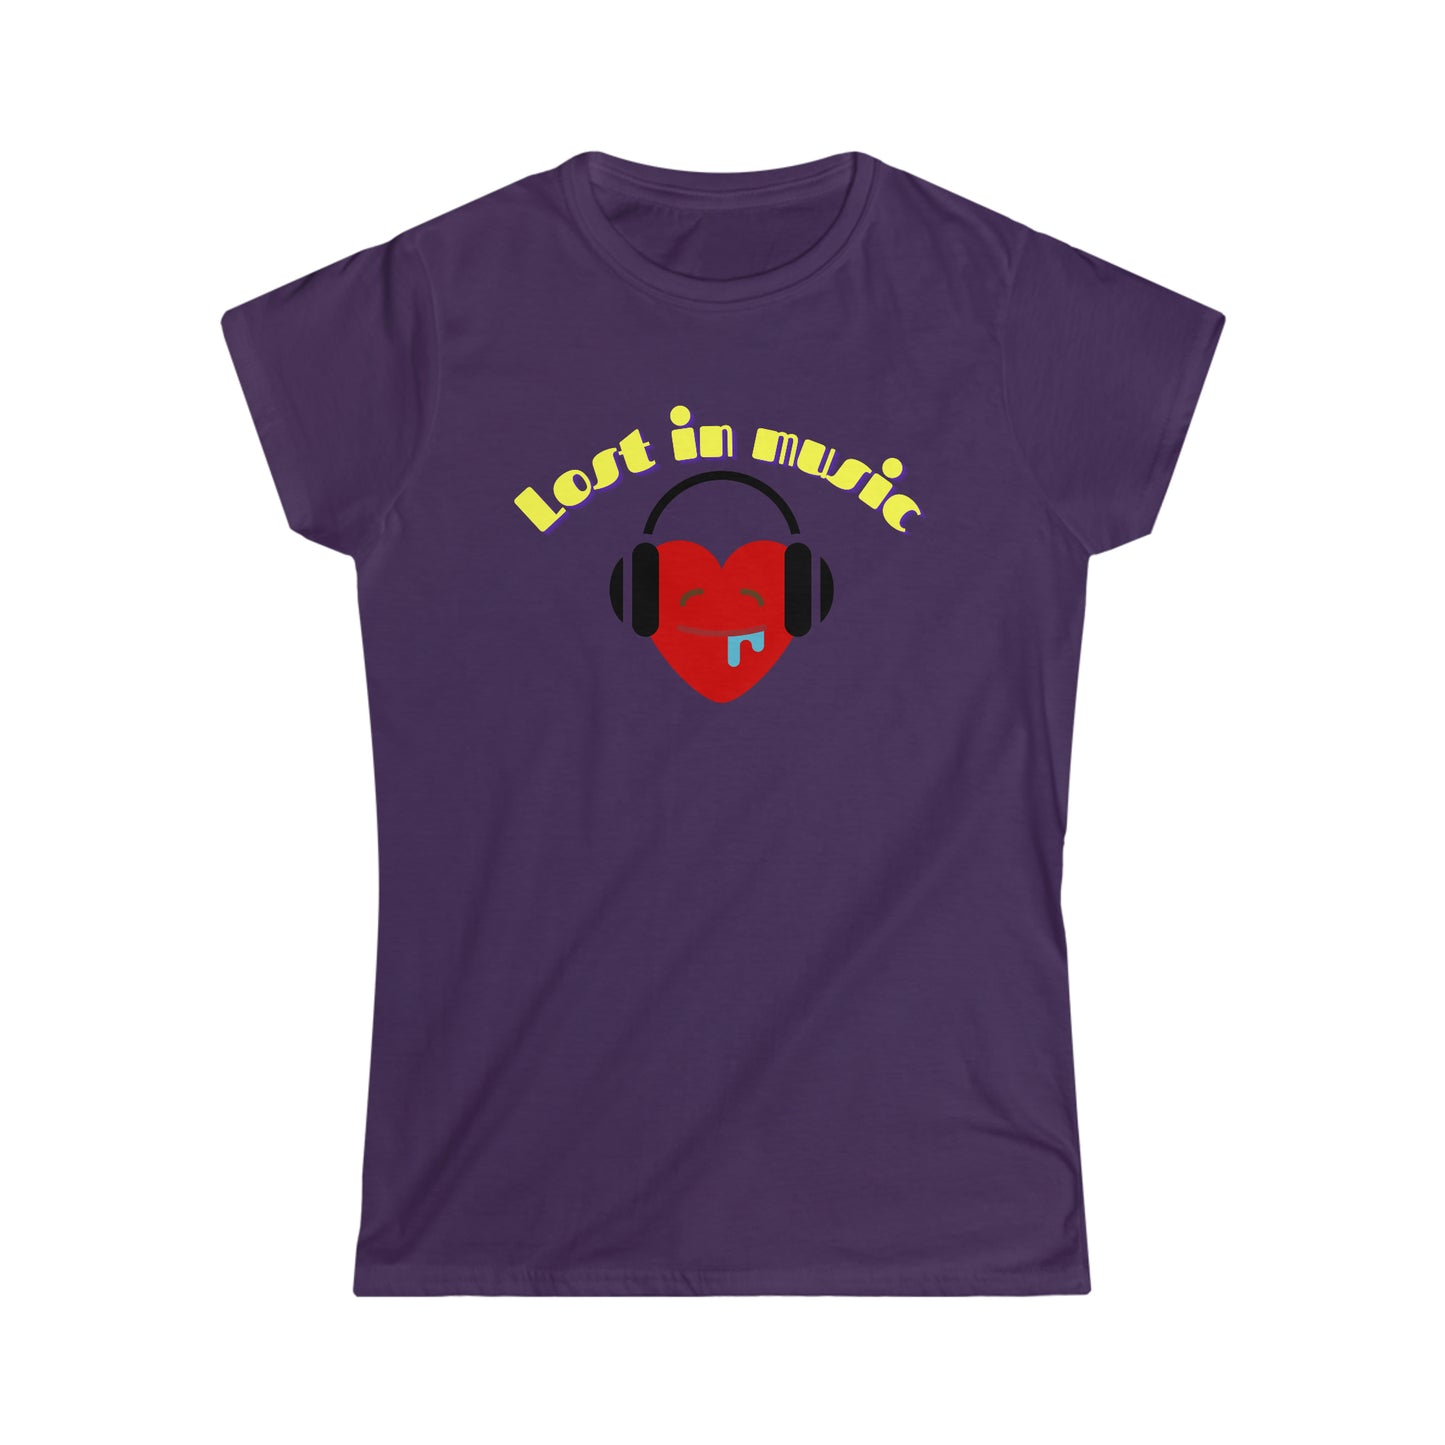 A music tshirt with the text "Lost in music" and a picture of a cartoon heart drooling while it's listening to music on its headphones